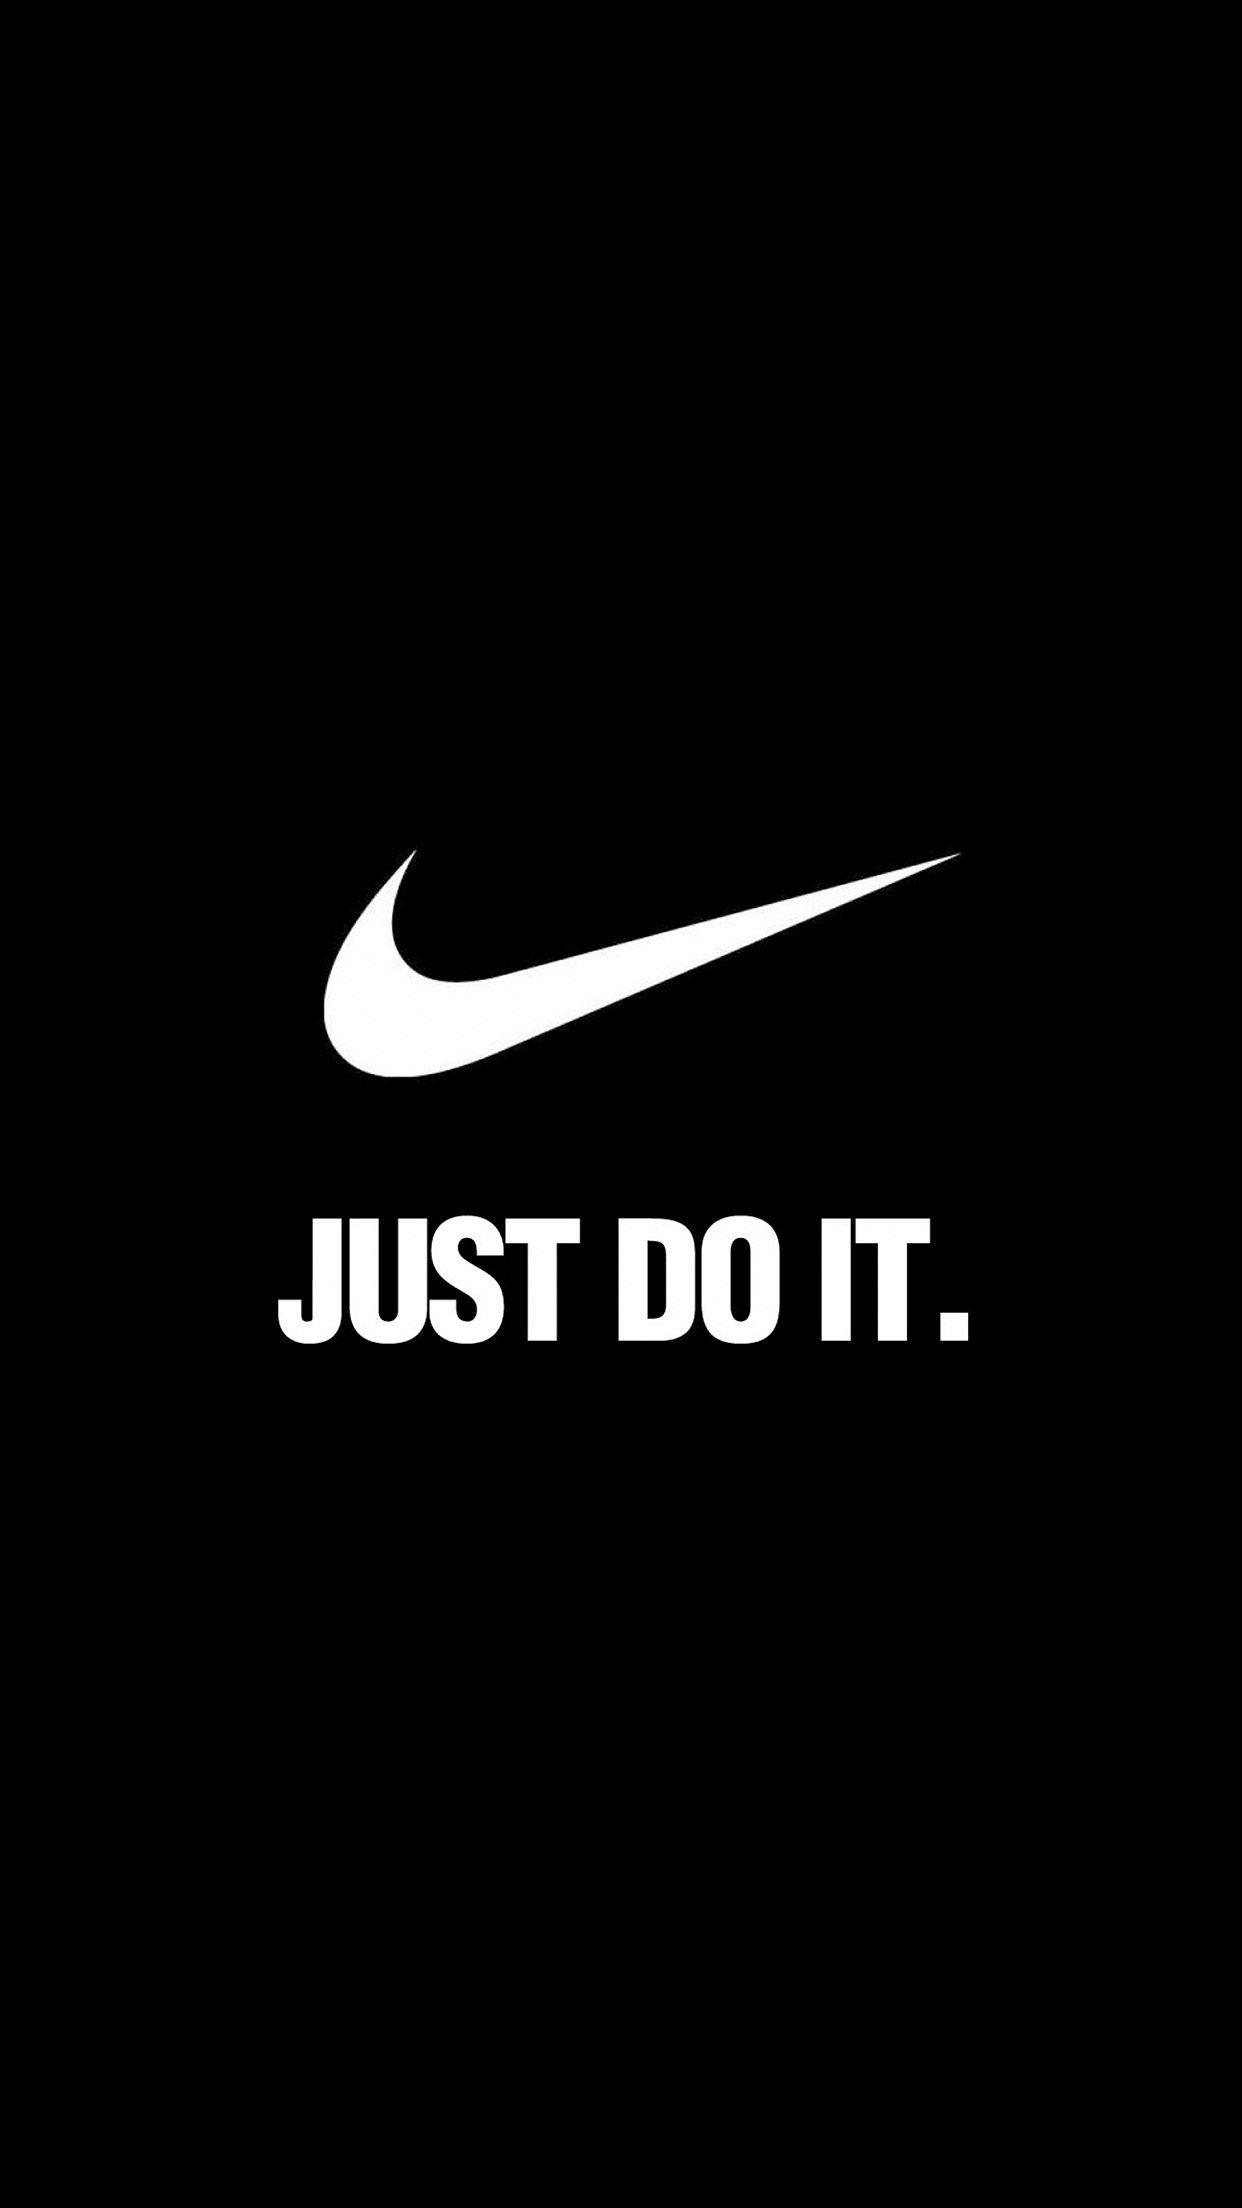 Nike Just Do It Wallpaper for iPhone